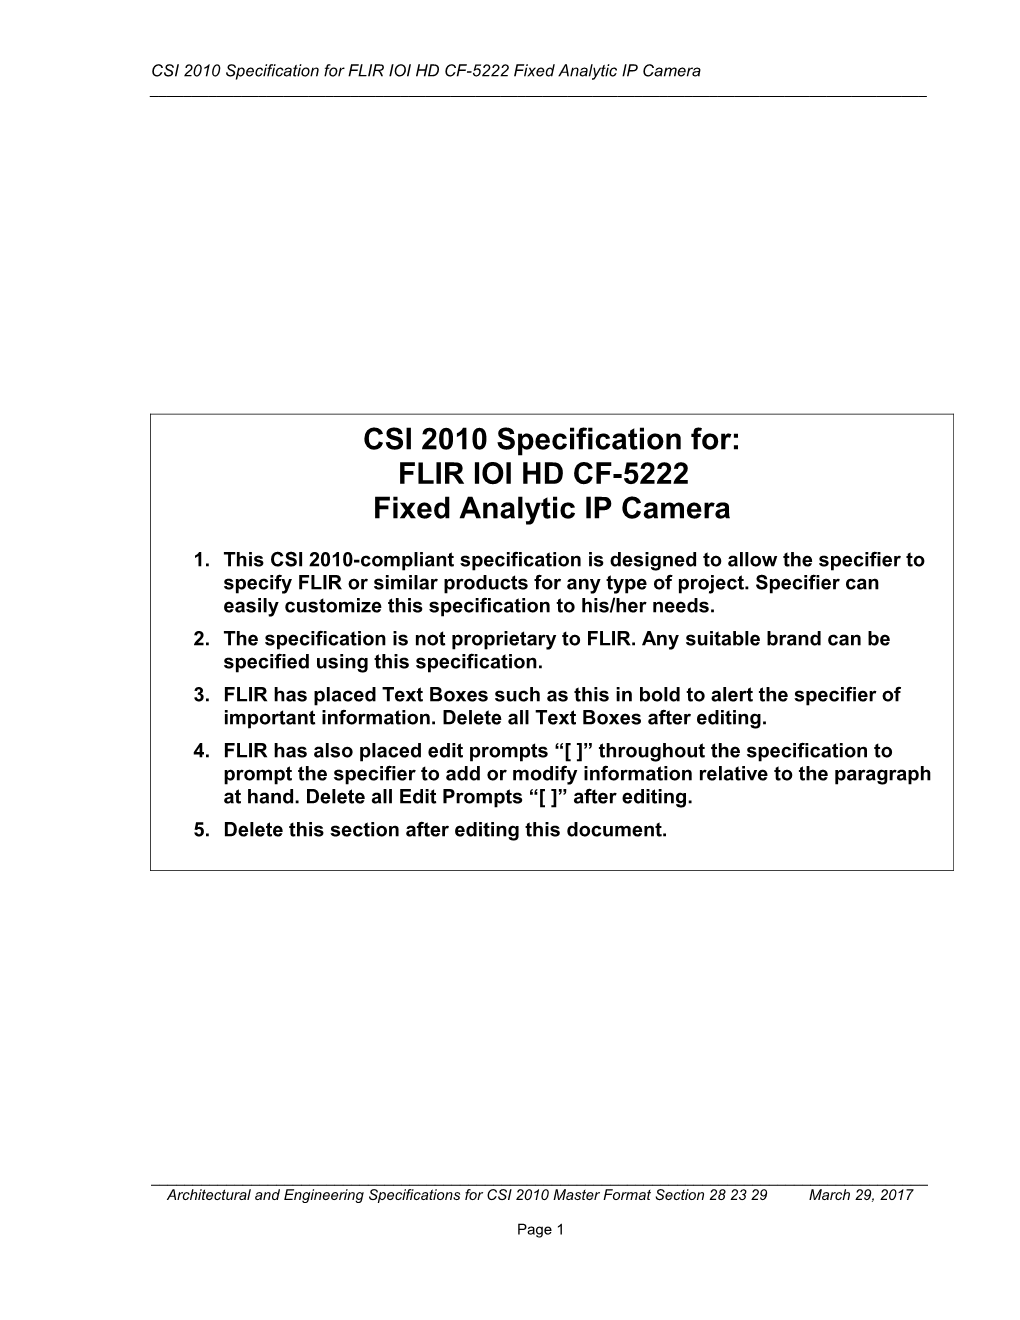 CSI 2010 Specification for CF-5222